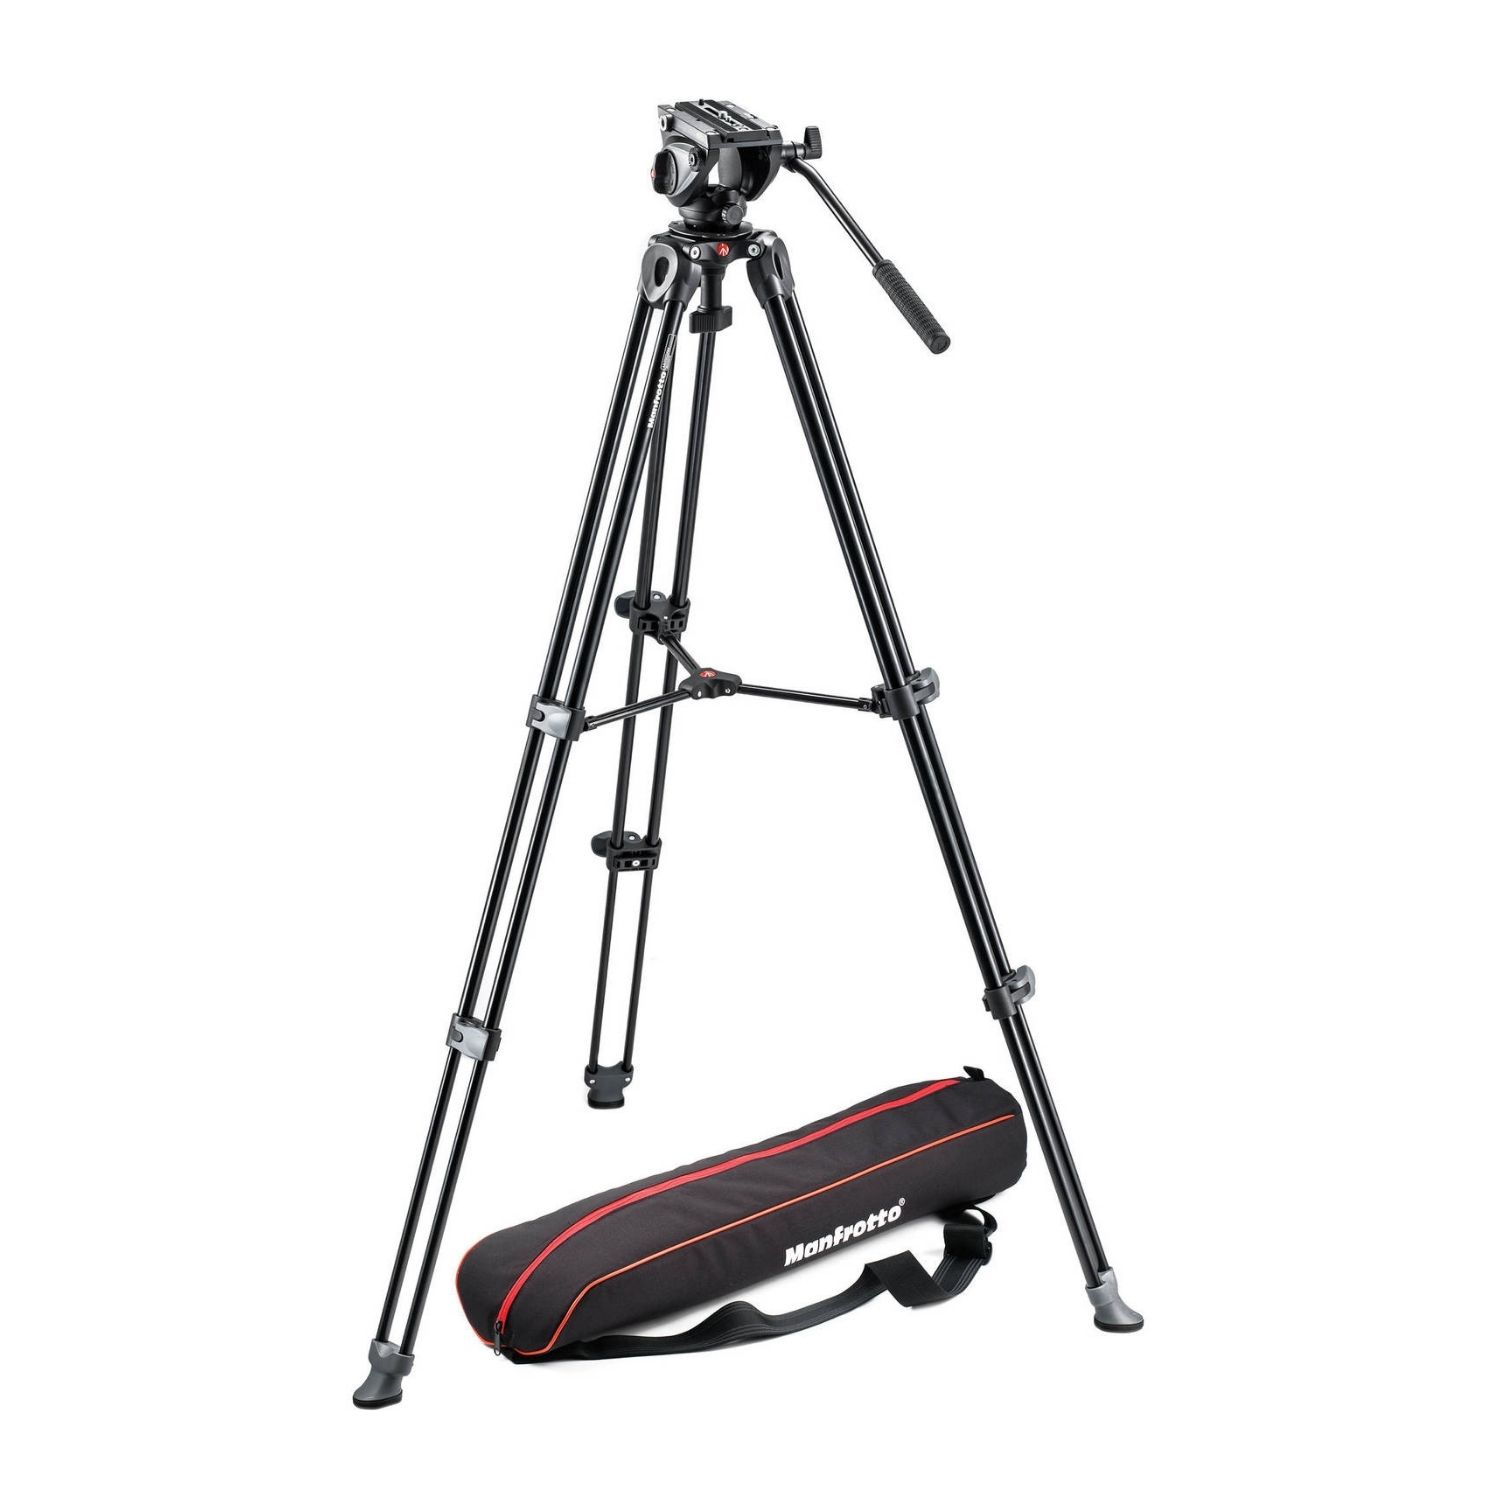 https://poojaelectronics.in/storage/2022/02/Manfrotto-MVK500AM-Tripod-with-Fluid-Video-Head-Online-Buy-Mumbai-India_1.jpg